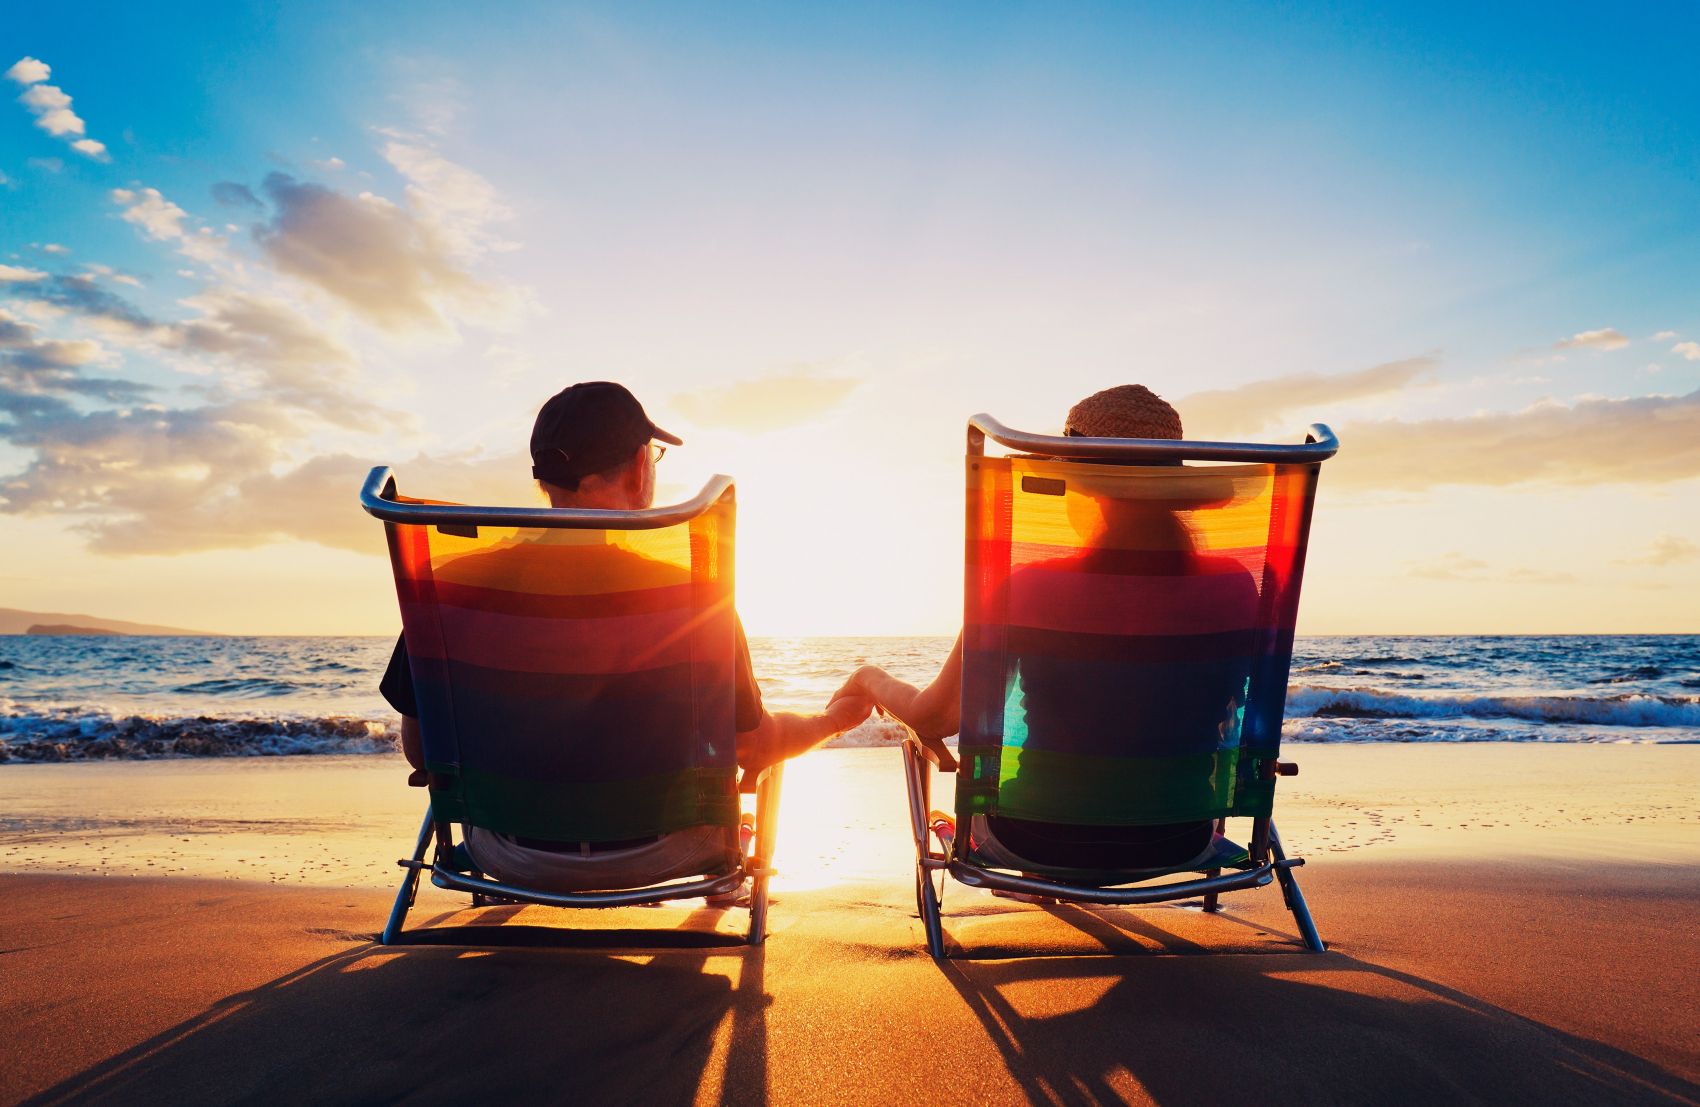 Couple sitting on beach chairs, holding hands watching sunrise on a beach